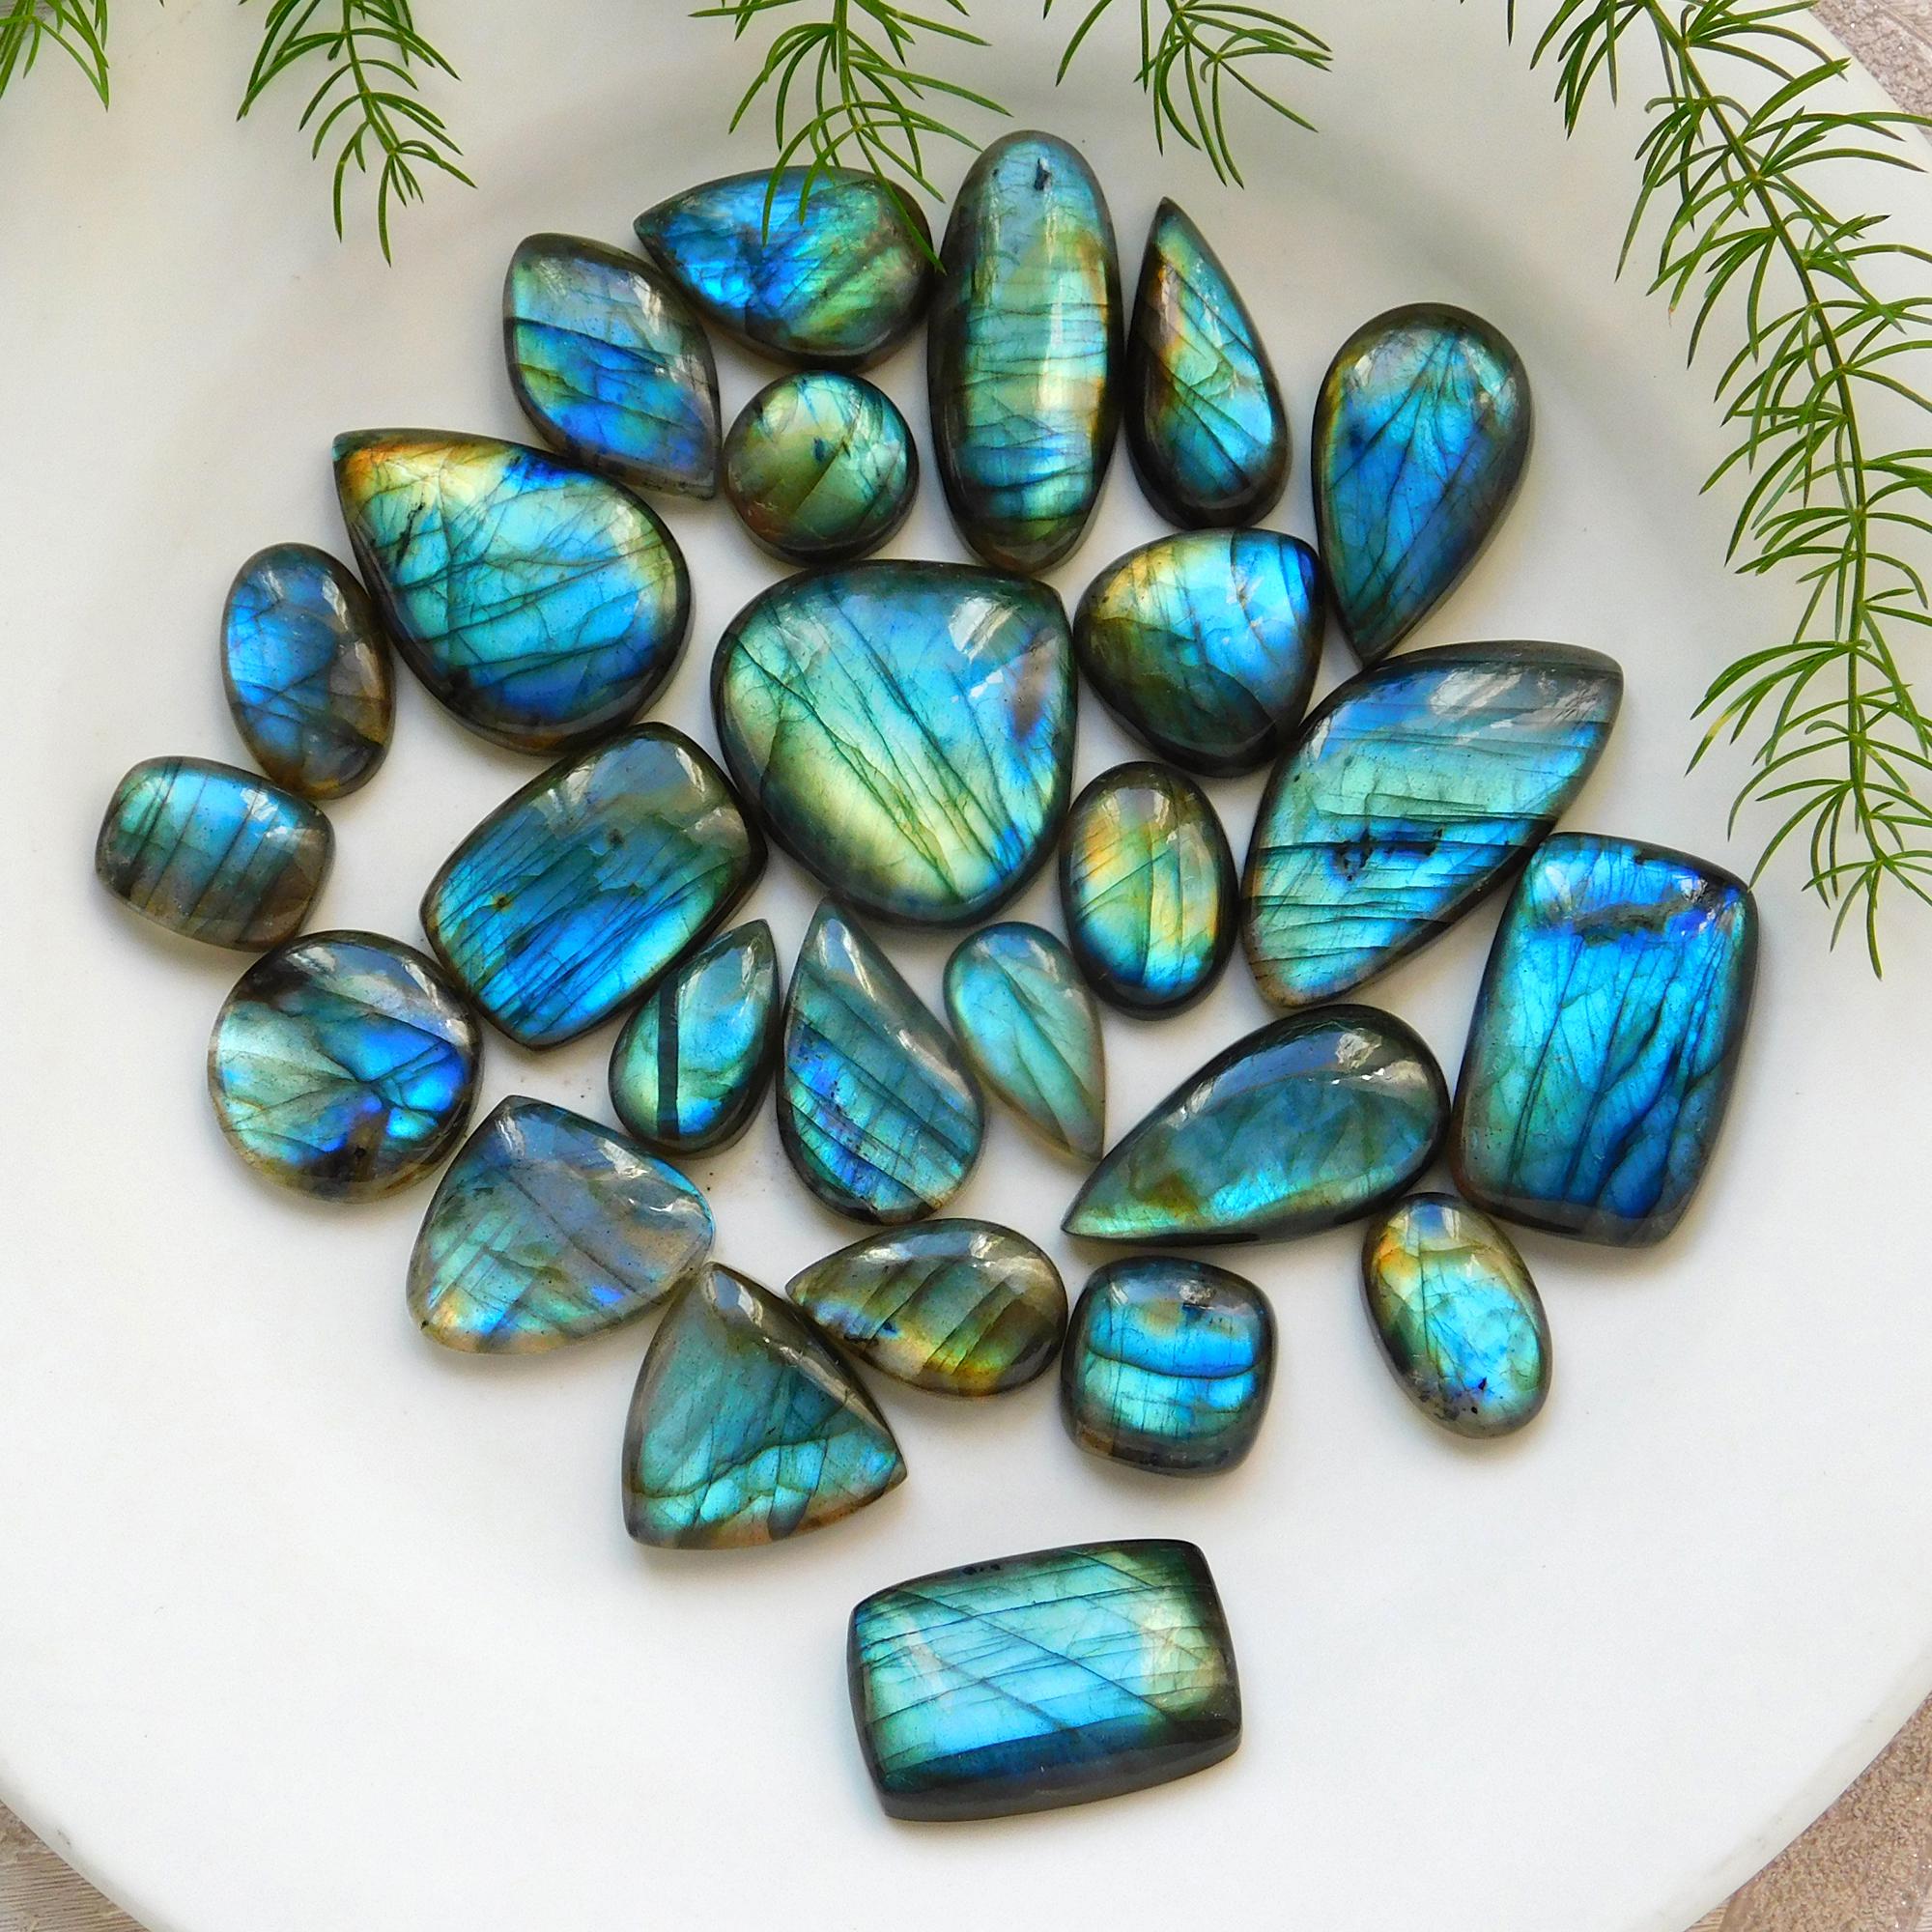 26 Pcs.495 Cts Natural labradorite Cabochon Loose Gemstone For Jewelry Wholesale Lot Size 34X15 17X13mm